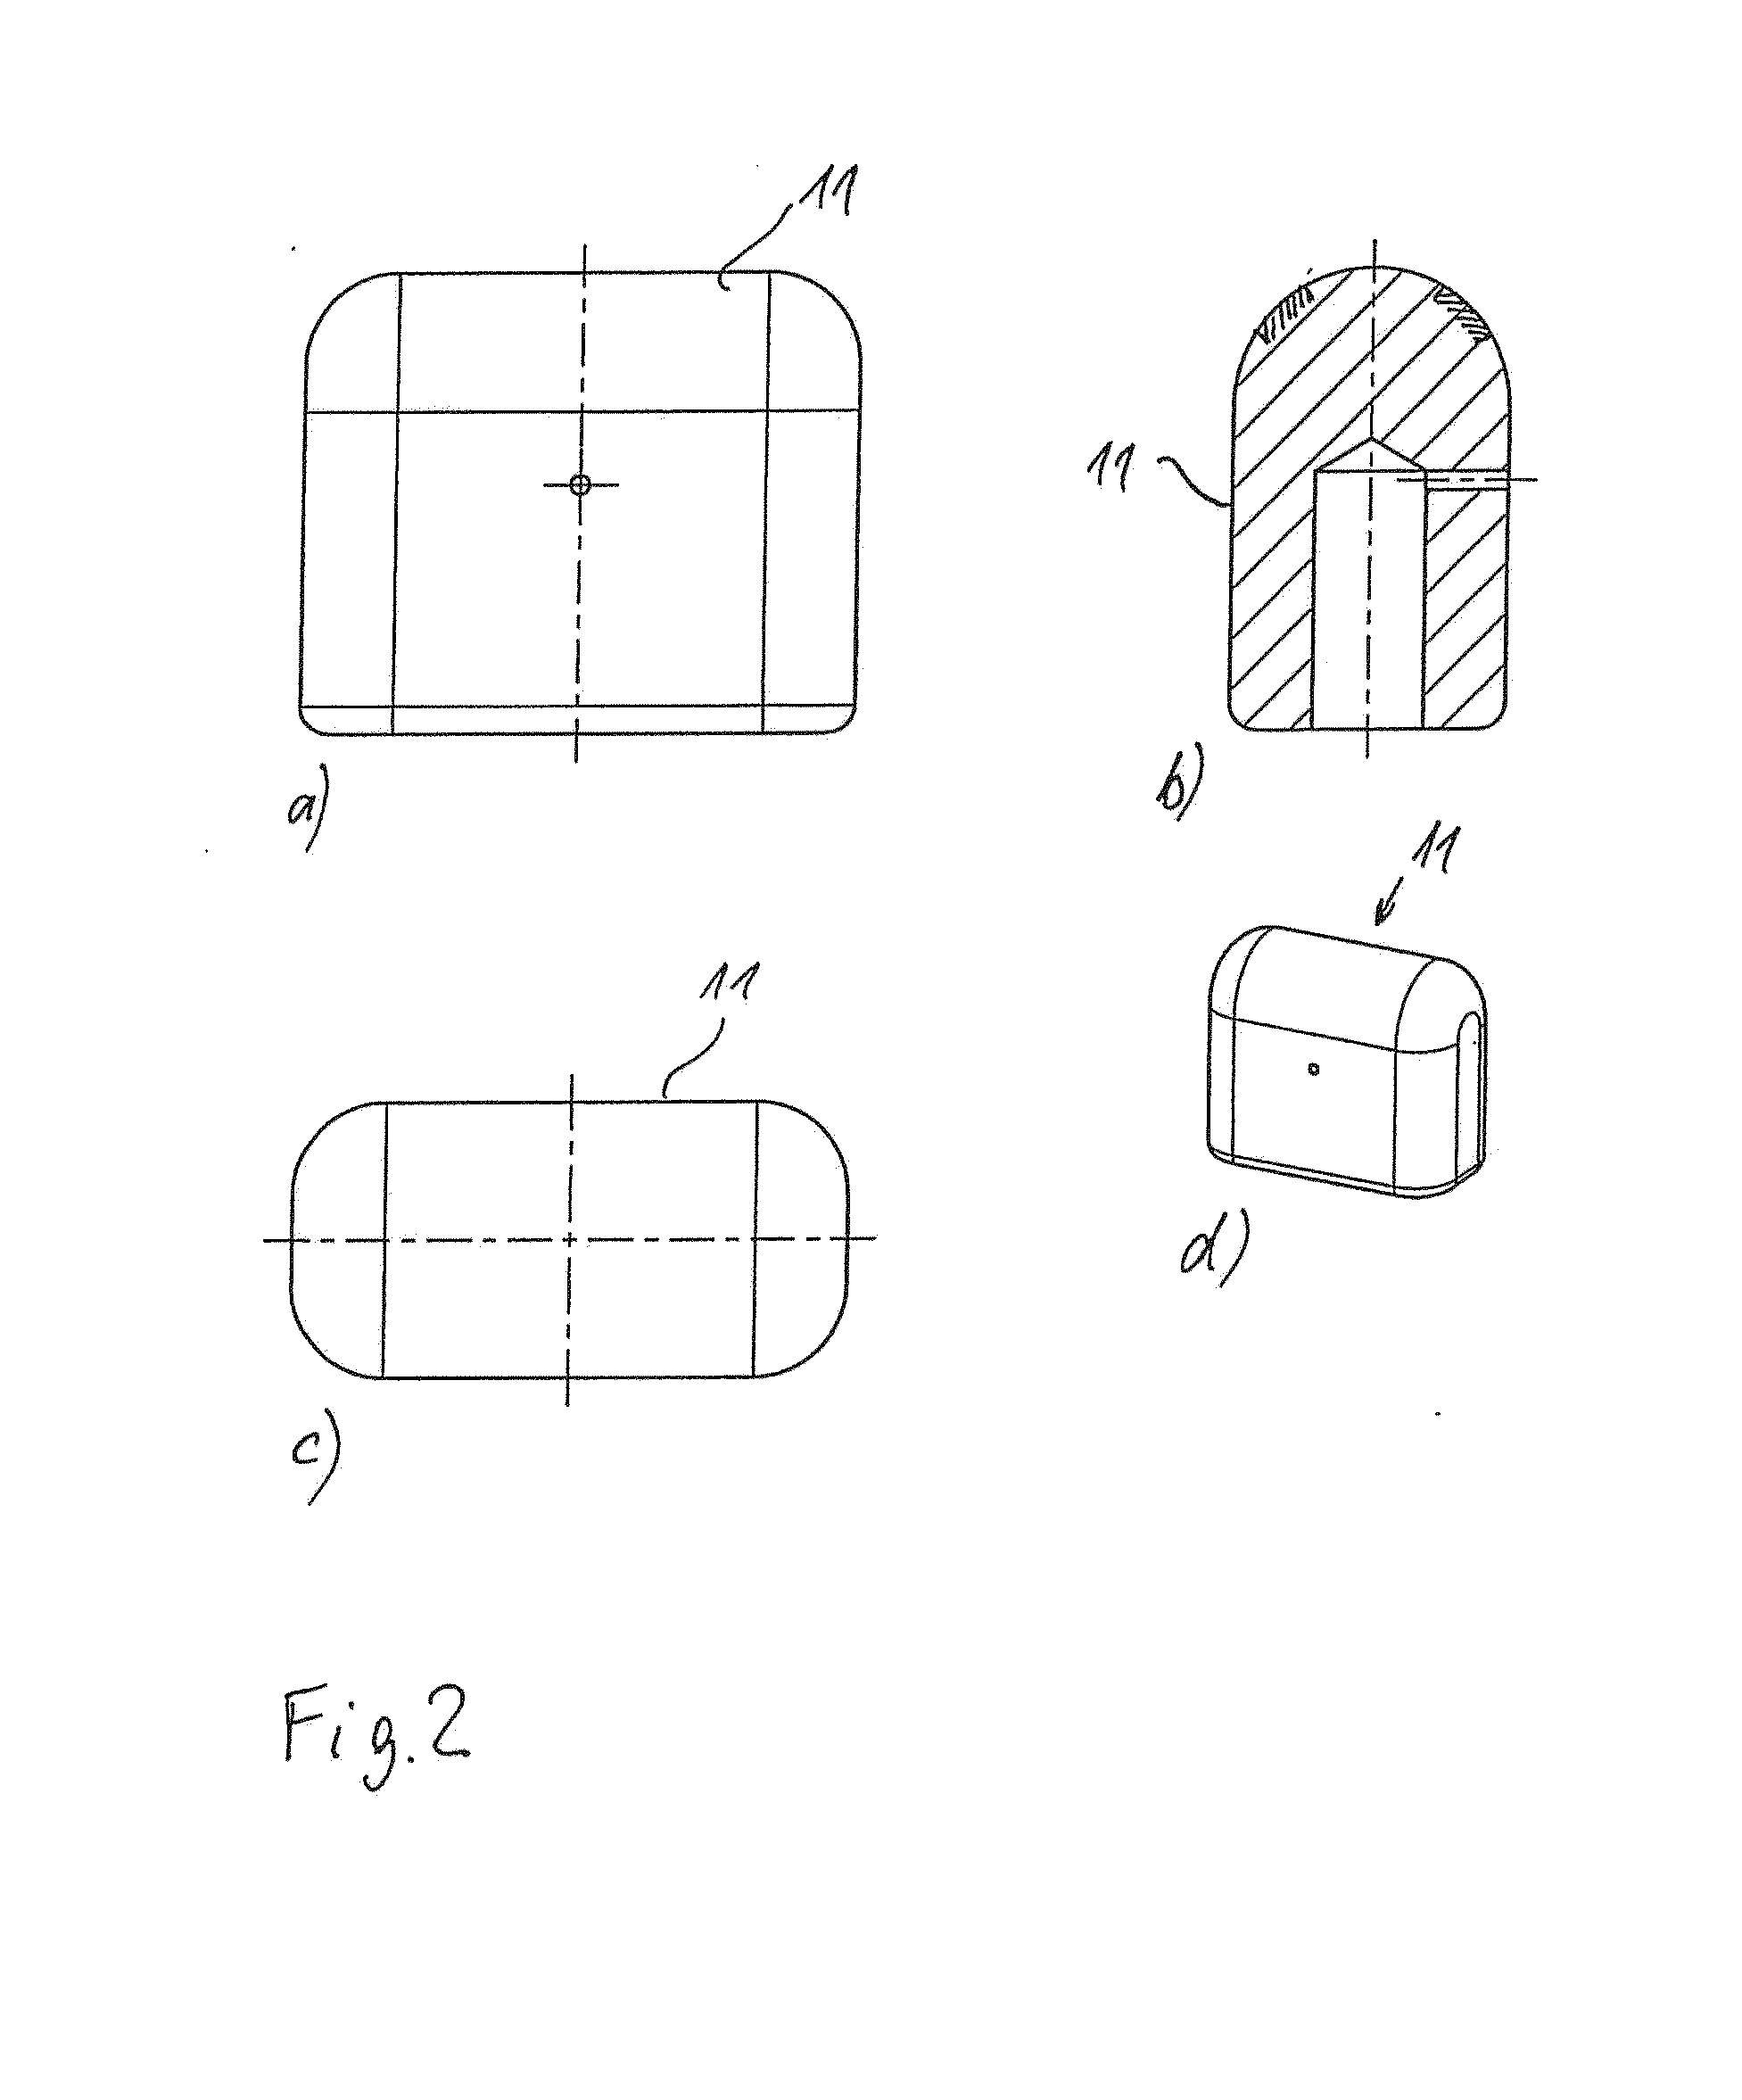 Apparatus for treating the human or animal body with mechanical strokes